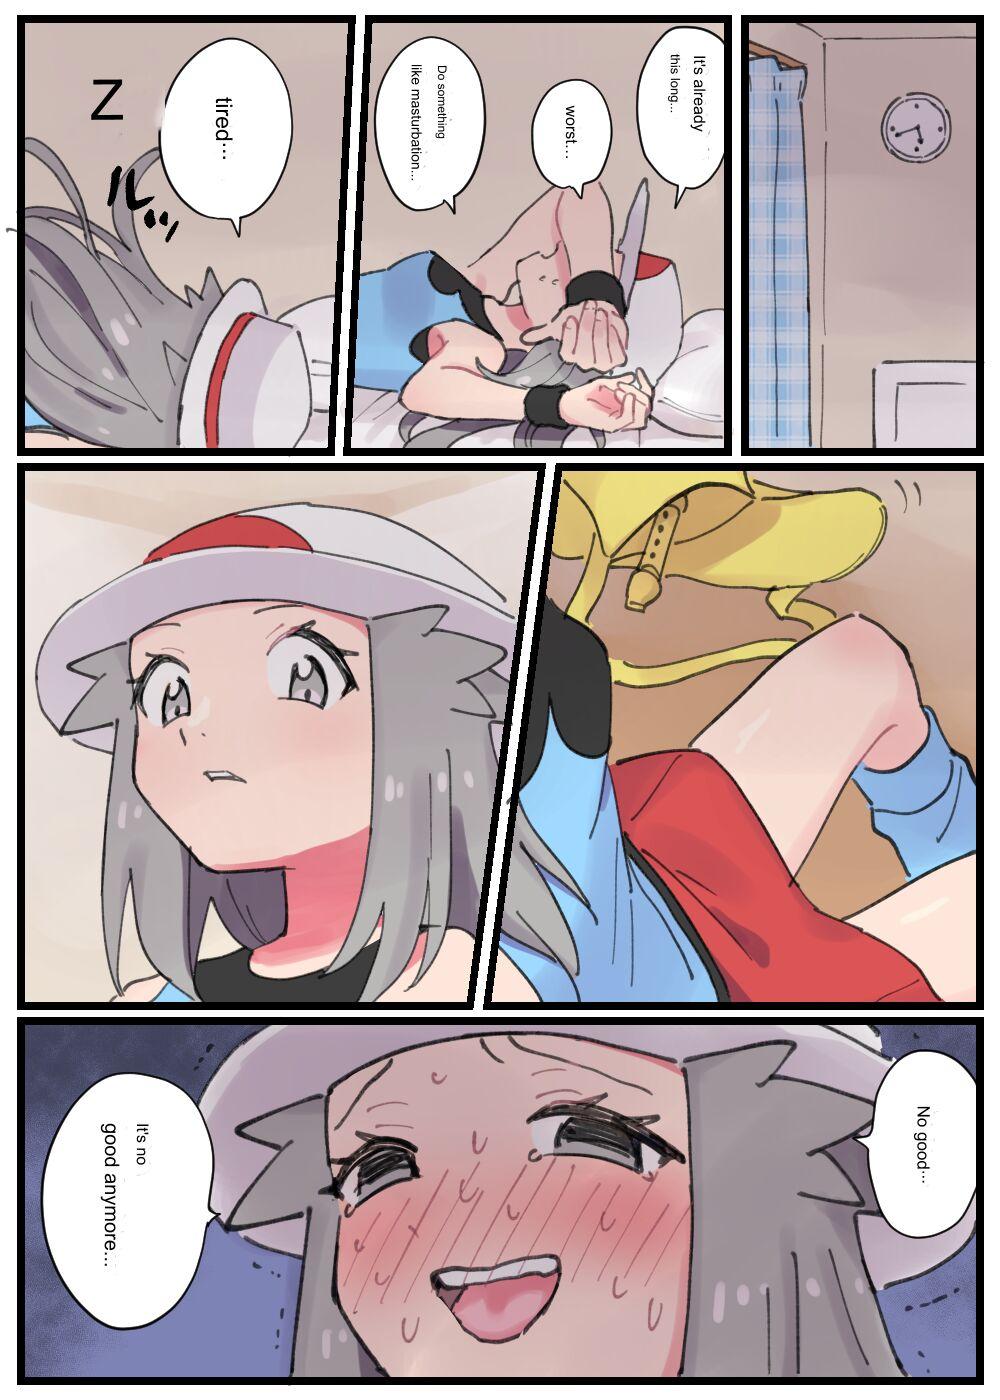 Hardcore Fucking Leaf goes to help Mayo-chan and gets hypnotically raped by Hypno - Pokemon | pocket monsters Japan - Page 11